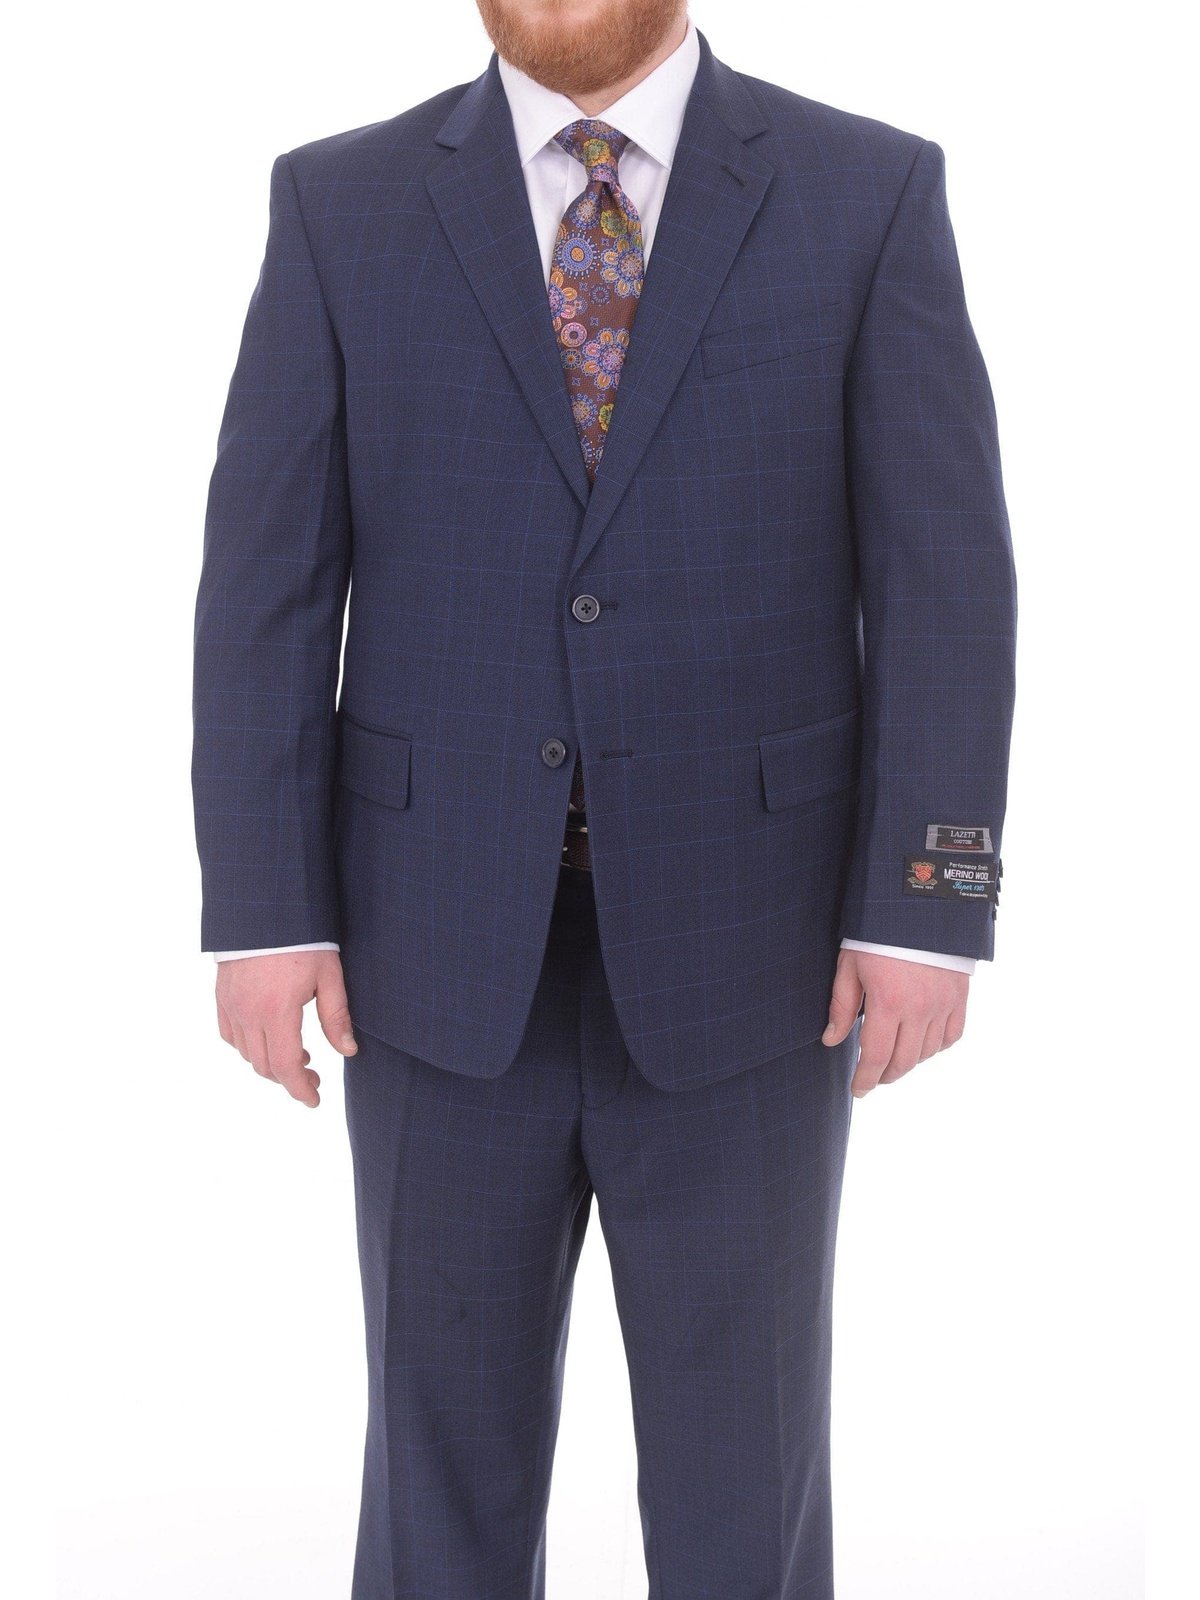 Lazetti Couture Sale Suits Lazetti Couture Portly Fit Blue Plaid With Overcheck Two Button Wool Suit